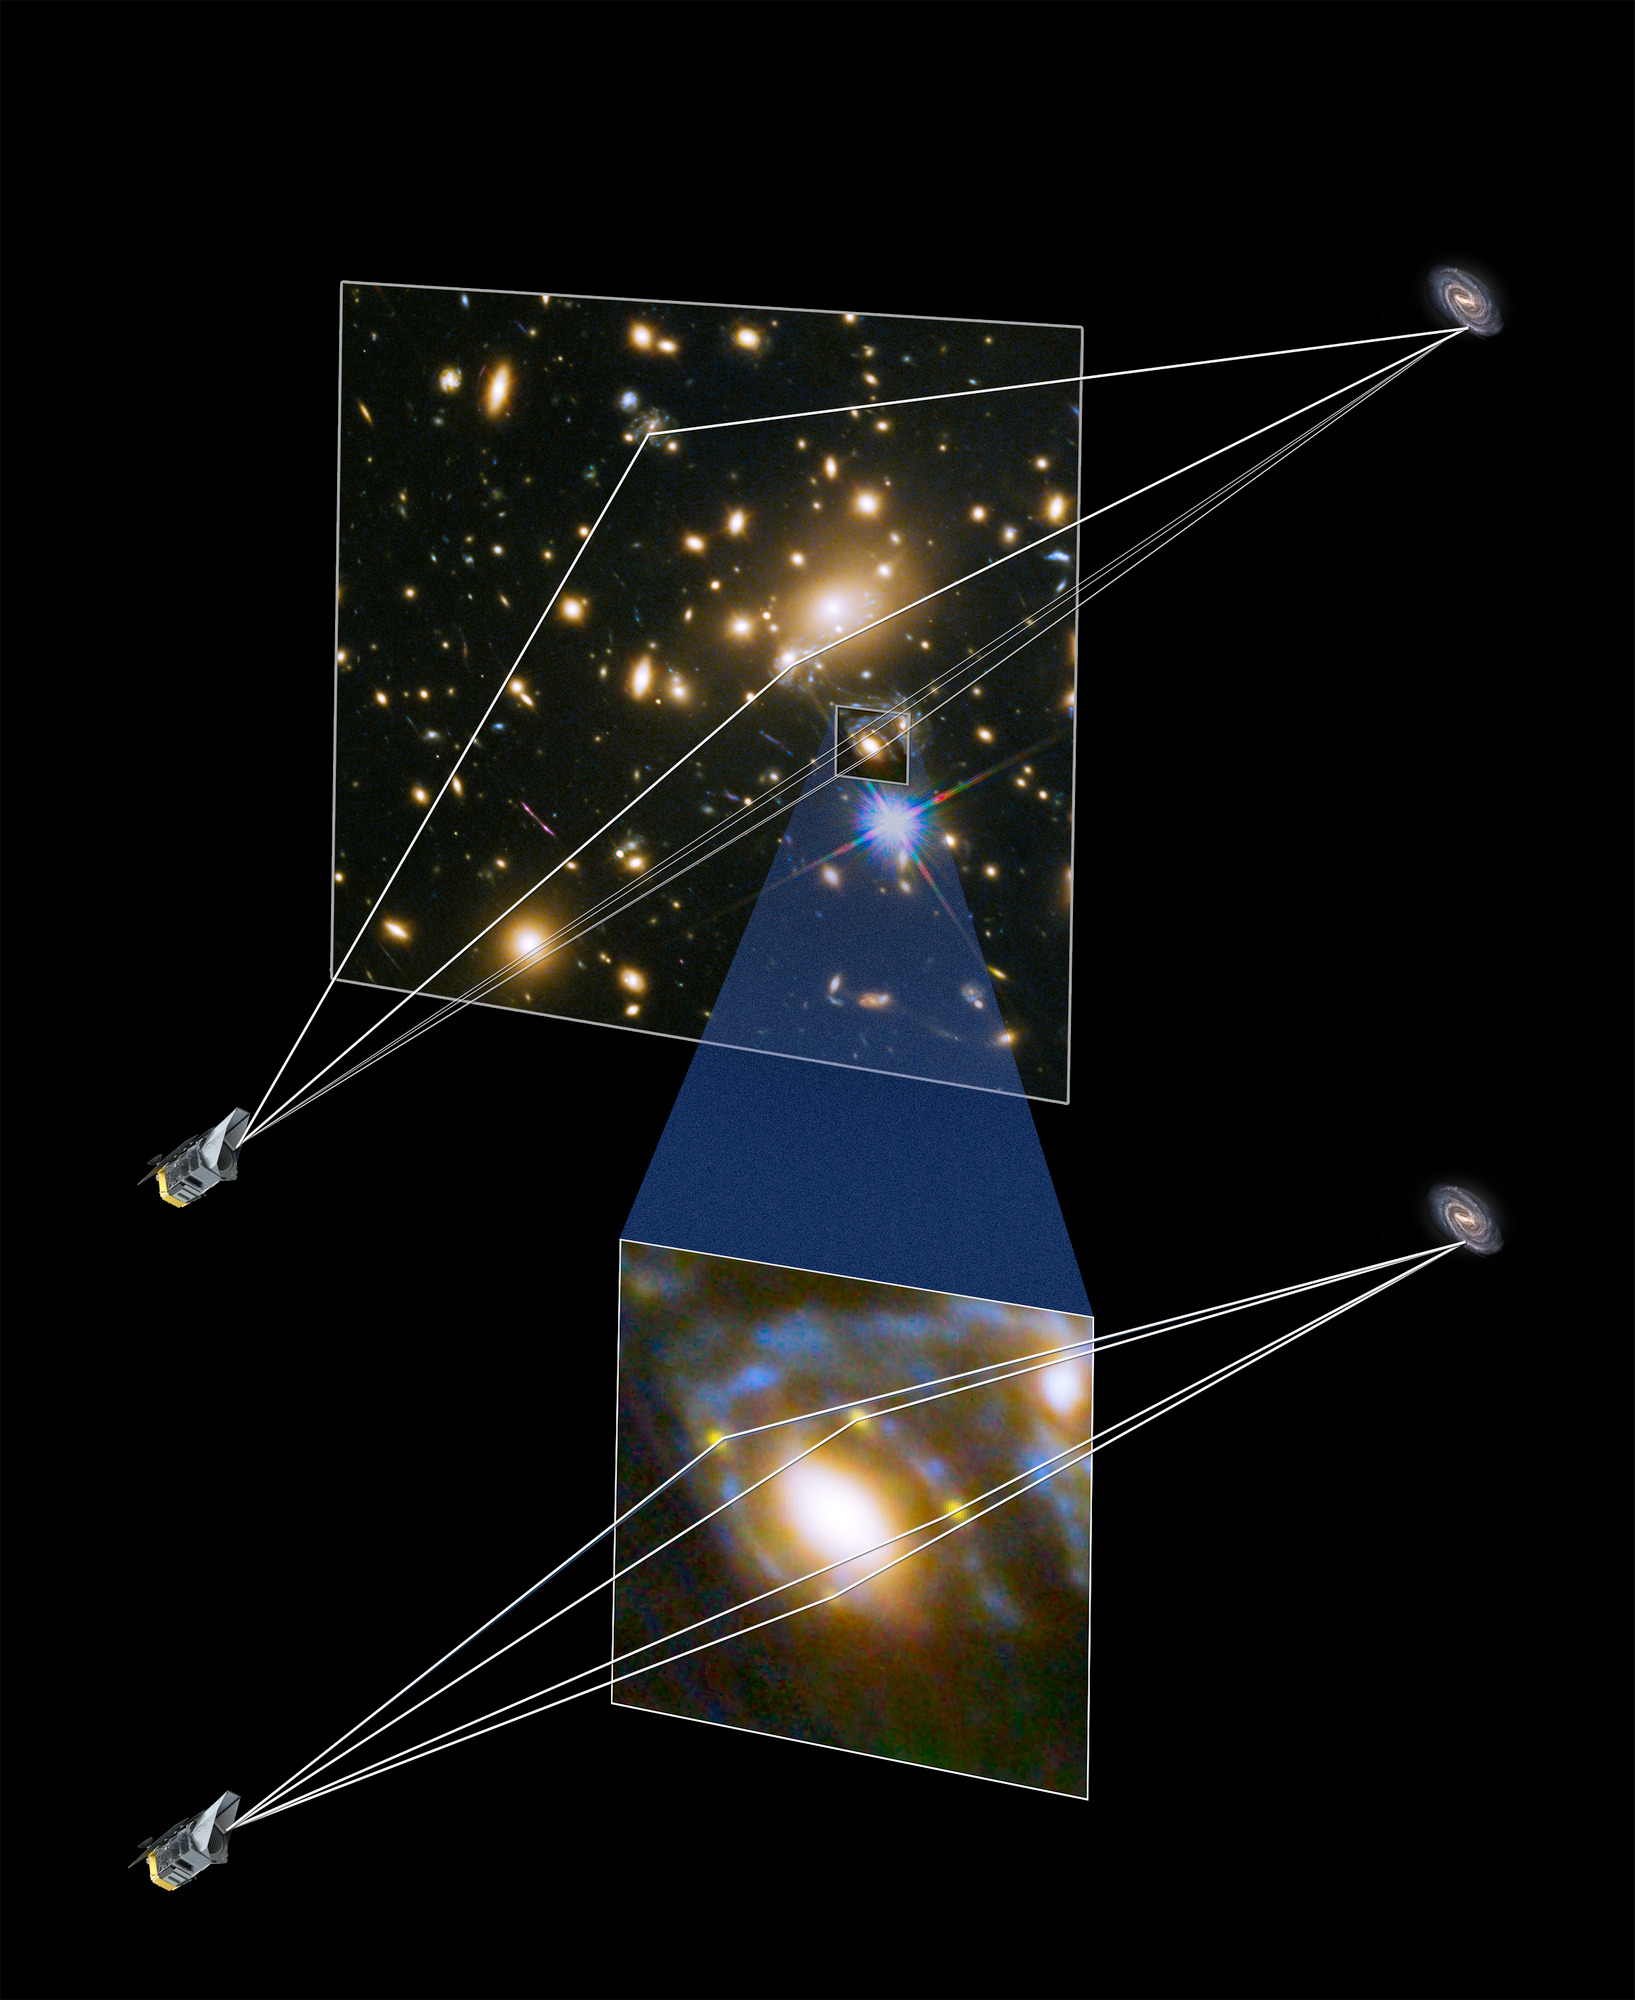 Graphic depiction of how the gravity from a cluster of galaxies bends the path of light from a distant supernova. At the top of the graphic is a Hubble image of a field of galaxies on a black background of space. At the bottom of the illustration is an enlarged view of a galaxy from the top image. Both the Hubble image at the top of the illustration and the enlarged inset image at the bottom of the graphic have lines running through them from below the bottom left corner of the respective image extended past the top right corner of each image. The lines extend from a model of the Roman space telescope at the bottom left across each image to a distant galaxy at the top. On each image, the lines represent the light paths from distant supernova in the galaxy at the top right are bent by the cluster’s gravity and redirected onto new paths.